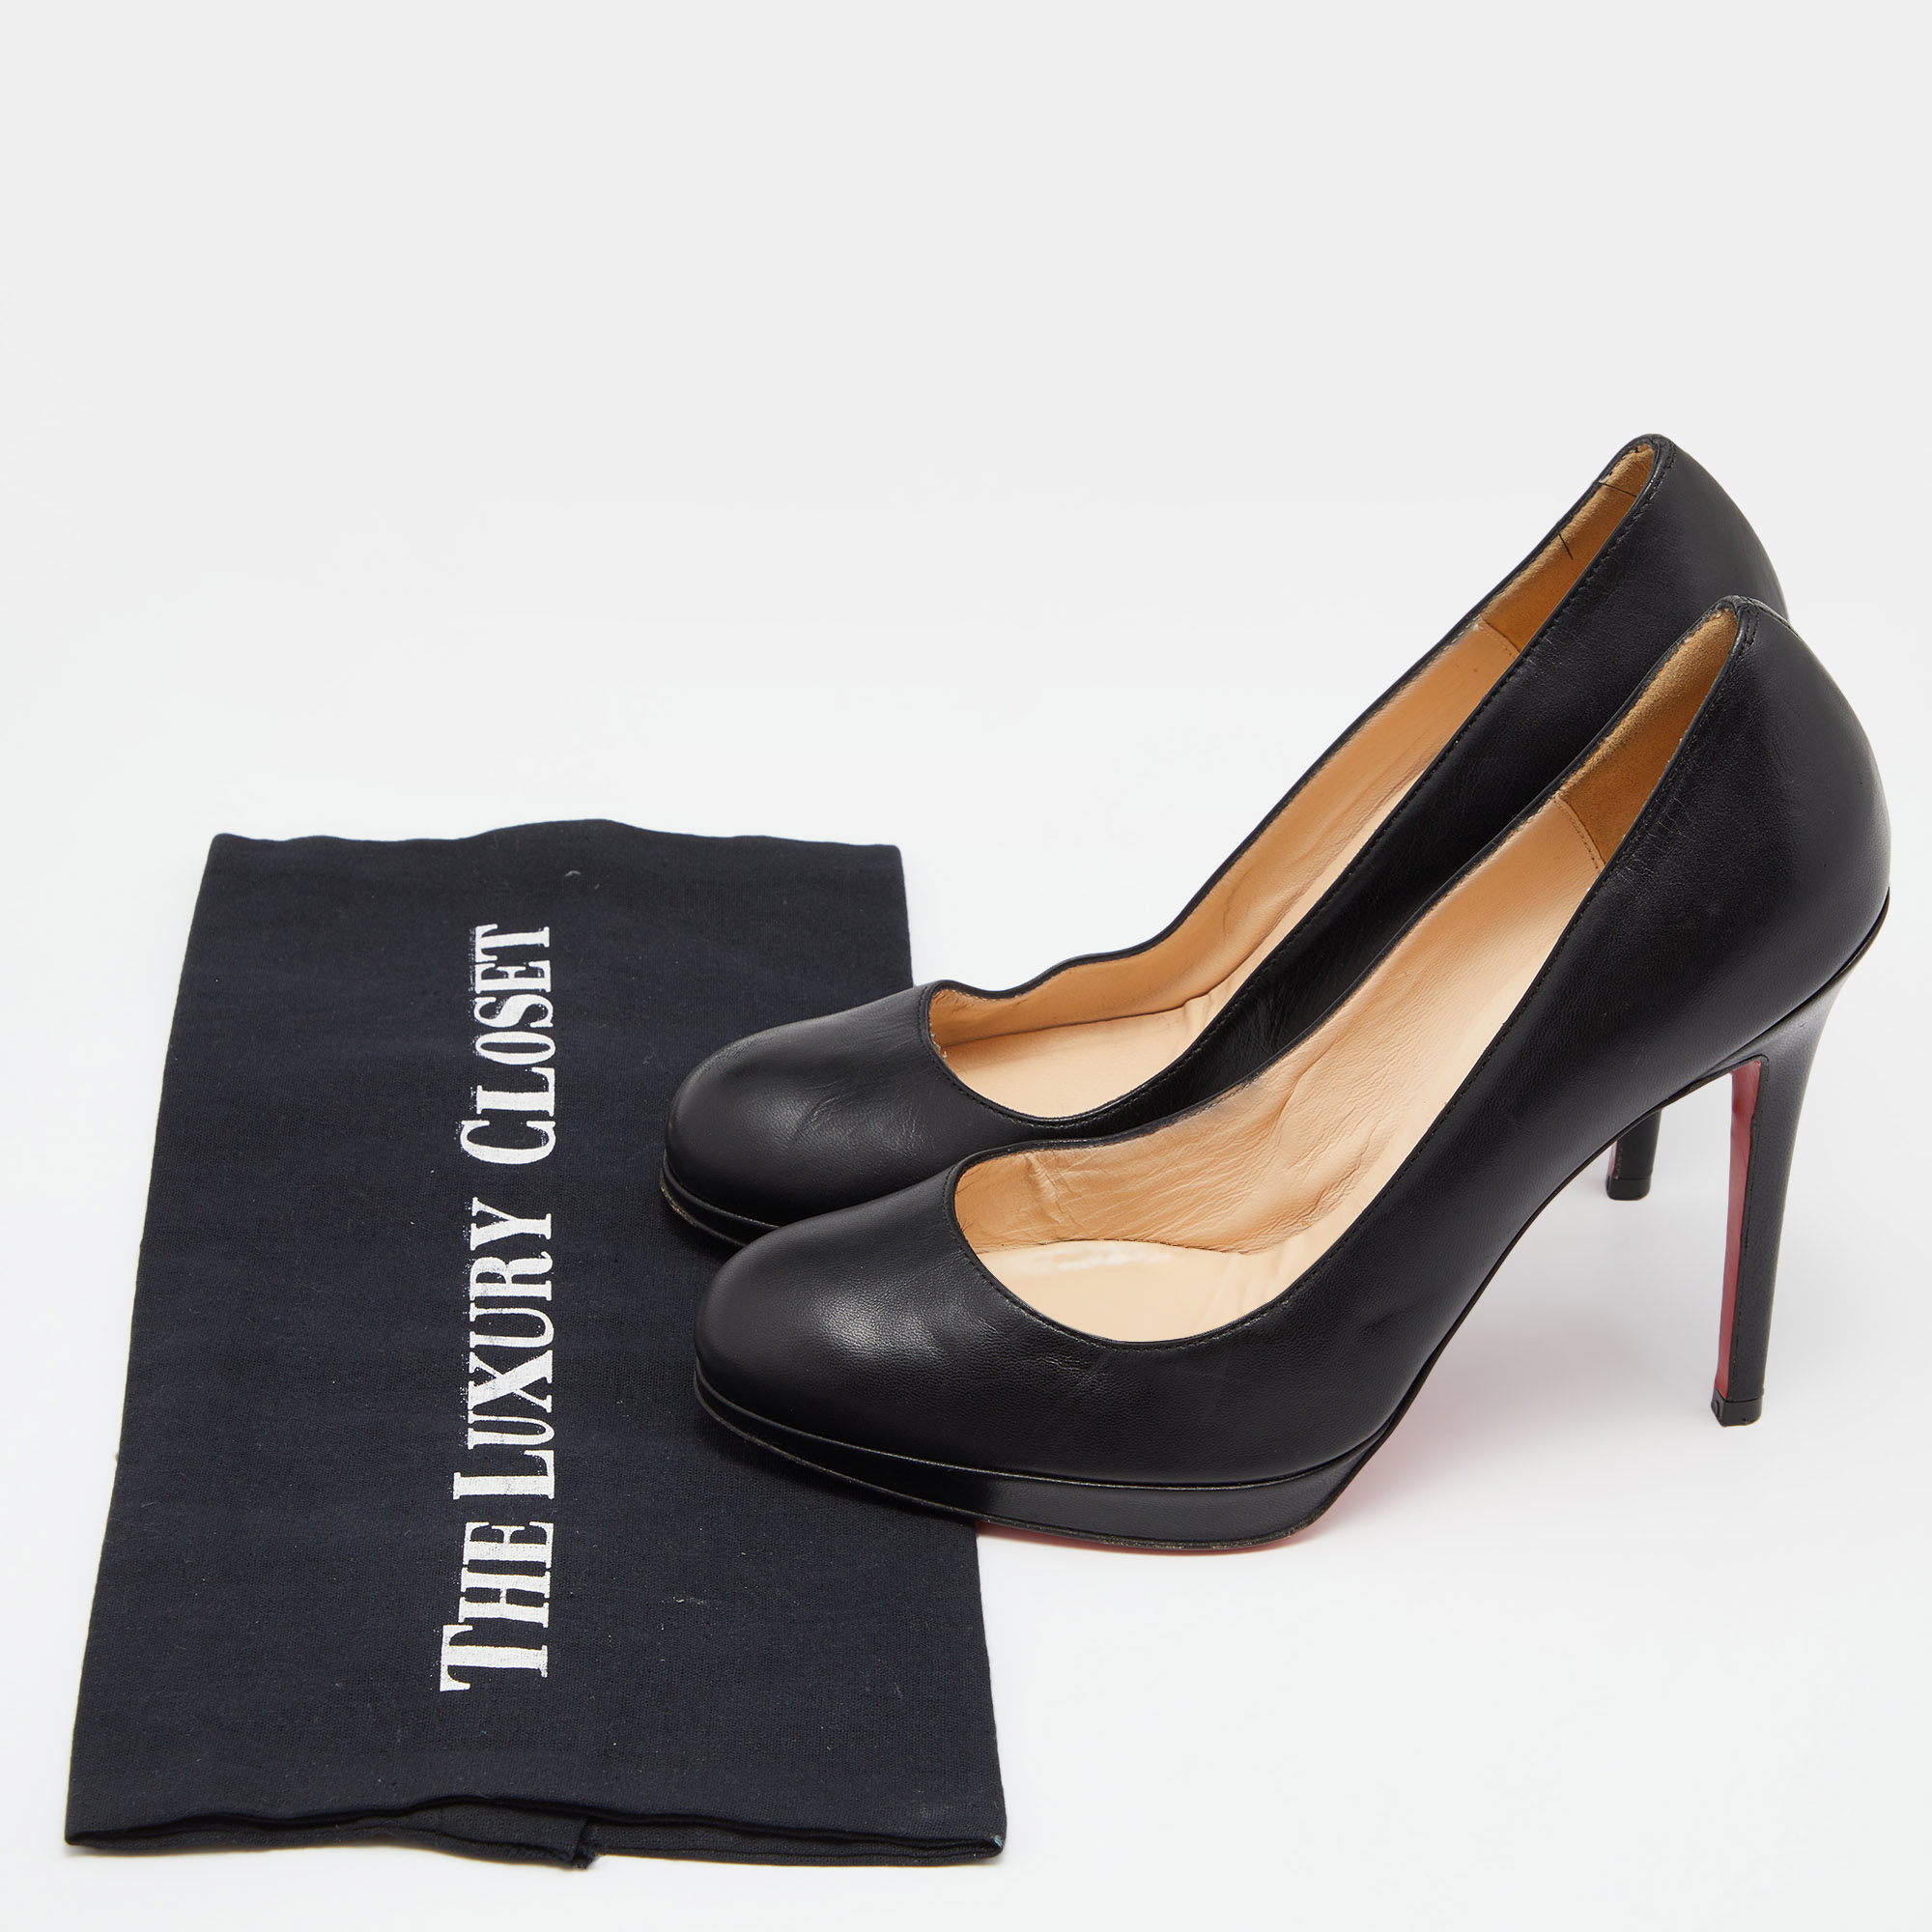 Christian Louboutin Black Leather New Simple Pumps Size 37.5